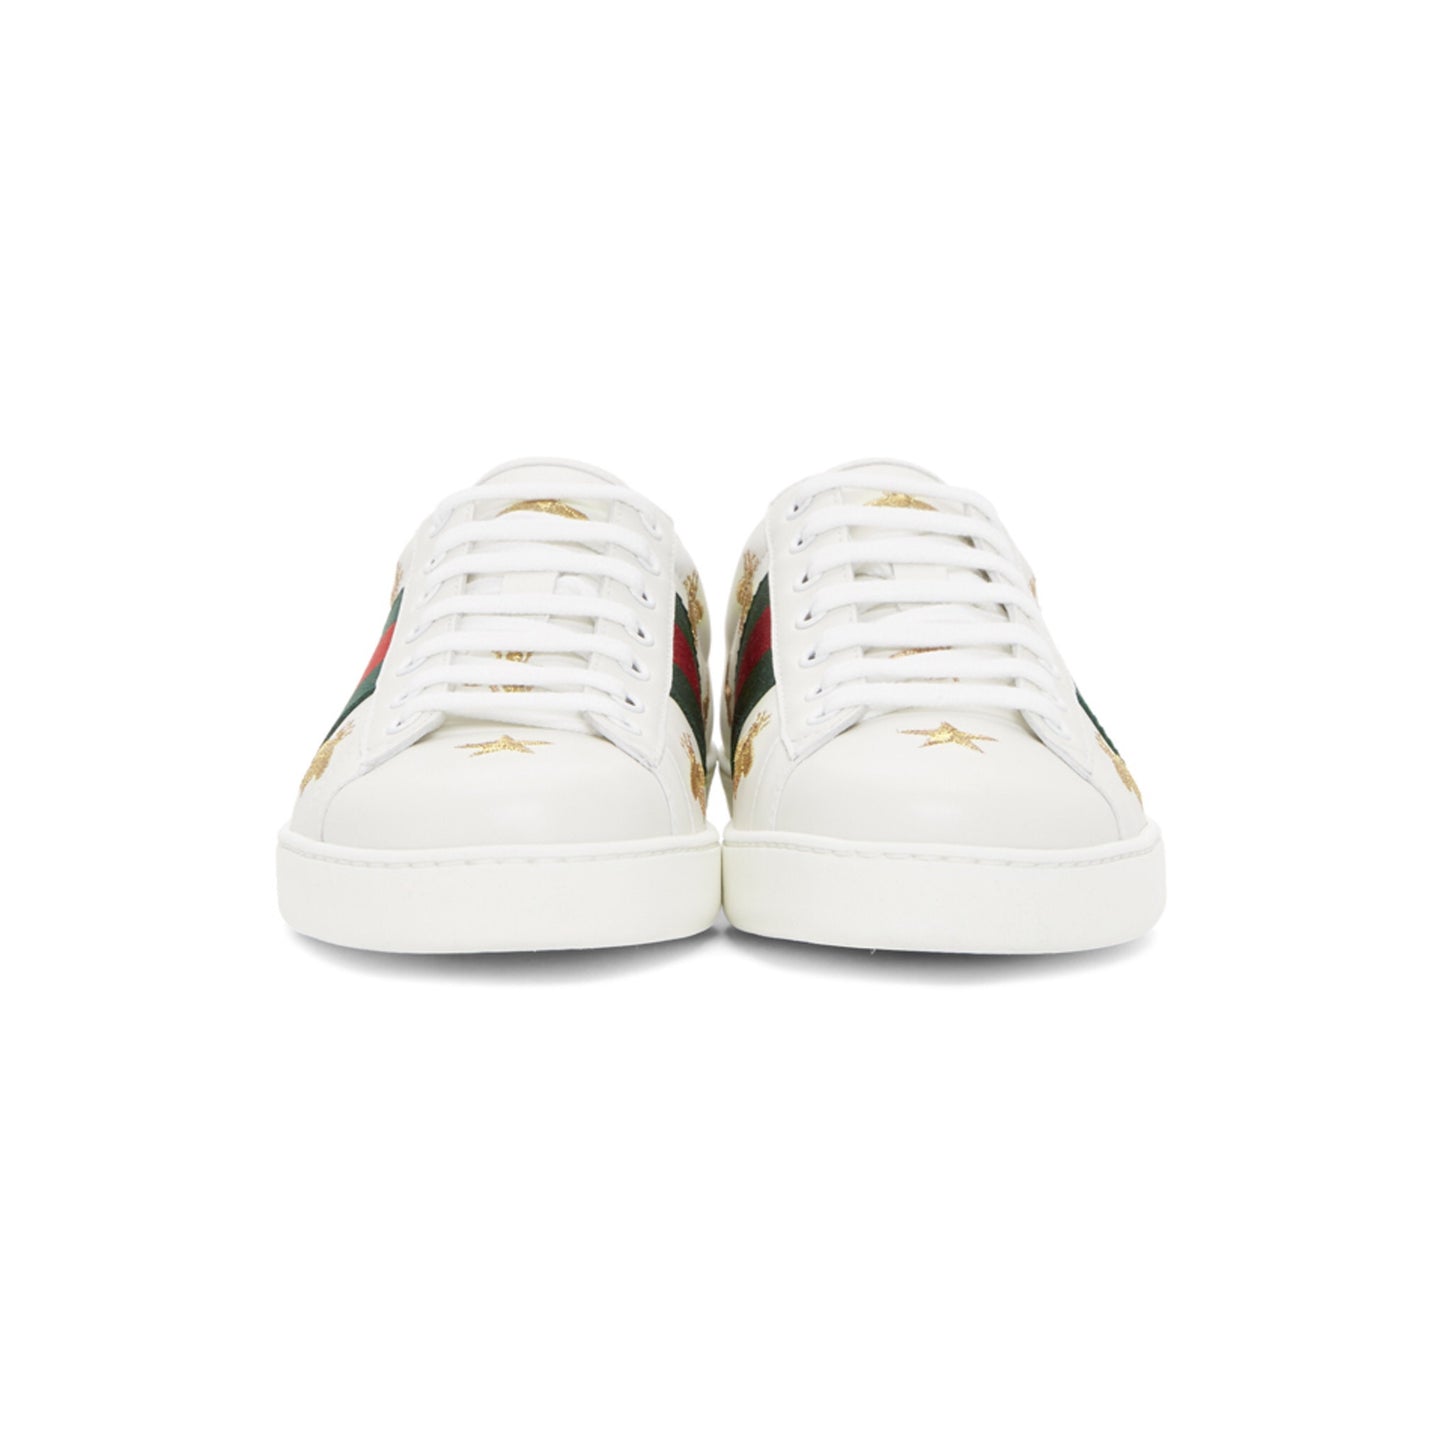 Gucci “bee & star white ace sneakers” - Centrall Online